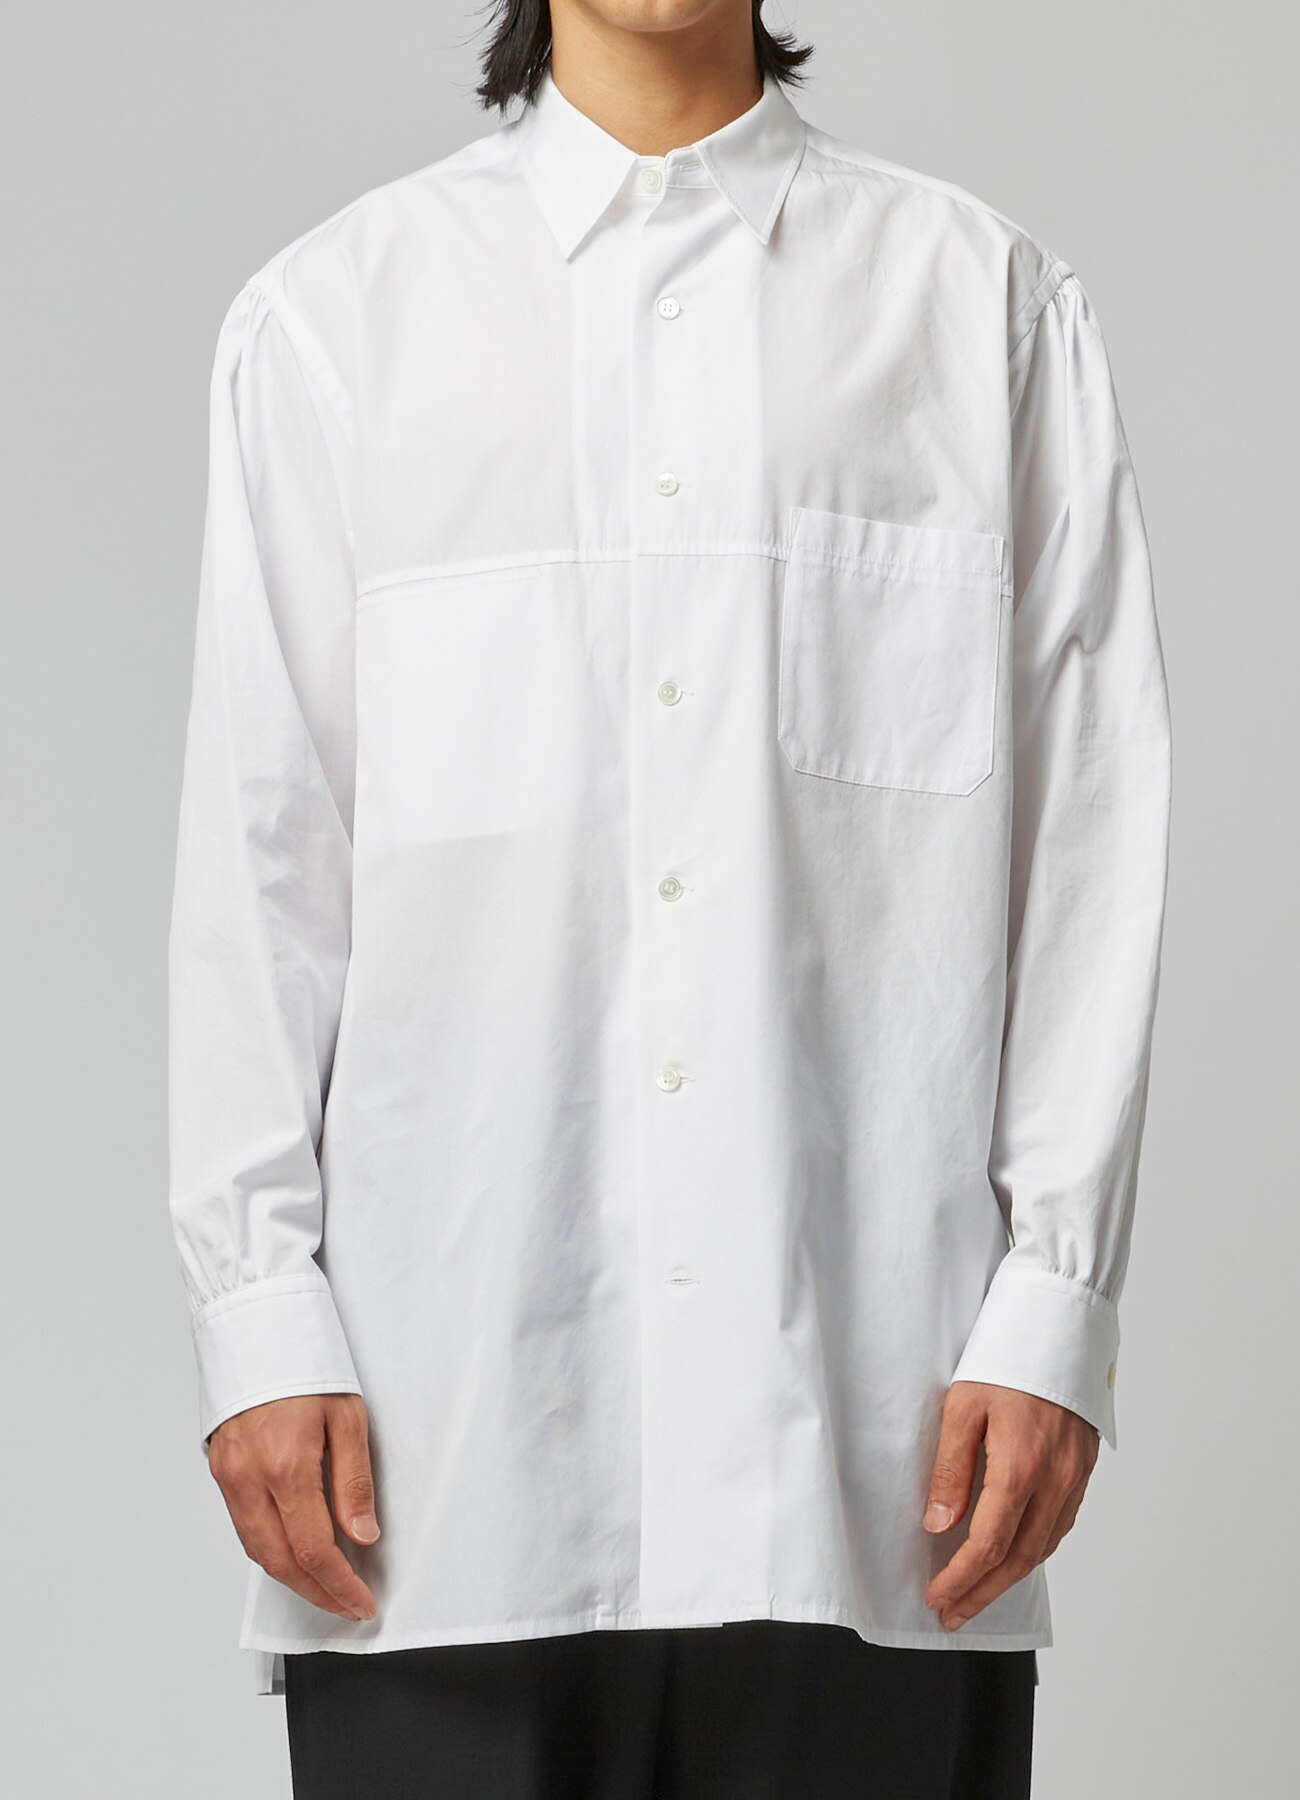 CLASSIC COTTON BROADCLOTH SHIRT WITH WIDE SLEEVE PLACKETS(S WHITE): Y's ...